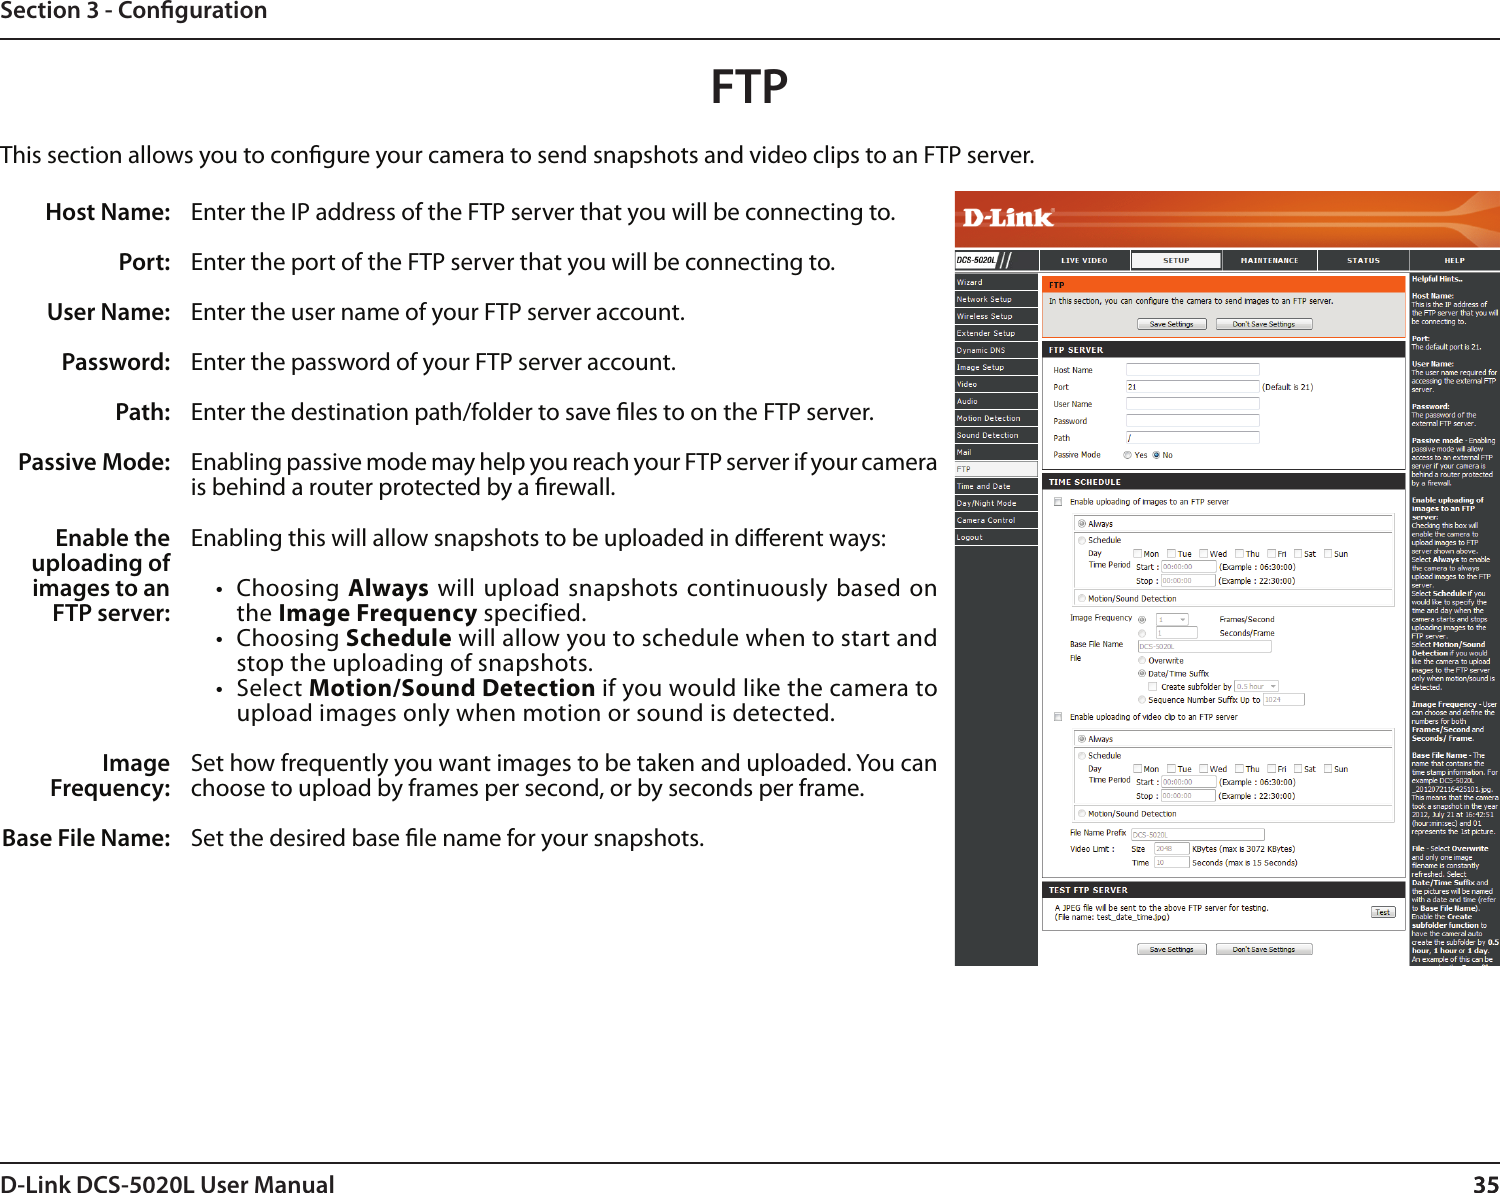 35D-Link DCS-5020L User Manual 35Section 3 - CongurationFTPHost Name:Port:User Name:Password:Path:Passive Mode:Enter the IP address of the FTP server that you will be connecting to.Enter the port of the FTP server that you will be connecting to. Enter the user name of your FTP server account.Enter the password of your FTP server account.Enter the destination path/folder to save les to on the FTP server.Enabling passive mode may help you reach your FTP server if your camera is behind a router protected by a rewall.This section allows you to congure your camera to send snapshots and video clips to an FTP server.Enable the uploading of images to an FTP server:Image Frequency:Base File Name:Enabling this will allow snapshots to be uploaded in dierent ways: •  Choosing Always will upload snapshots continuously based on the Image Frequency specified. •  Choosing Schedule will allow you to schedule when to start and stop the uploading of snapshots.•  Select Motion/Sound Detection if you would like the camera to upload images only when motion or sound is detected.Set how frequently you want images to be taken and uploaded. You can choose to upload by frames per second, or by seconds per frame.Set the desired base le name for your snapshots.